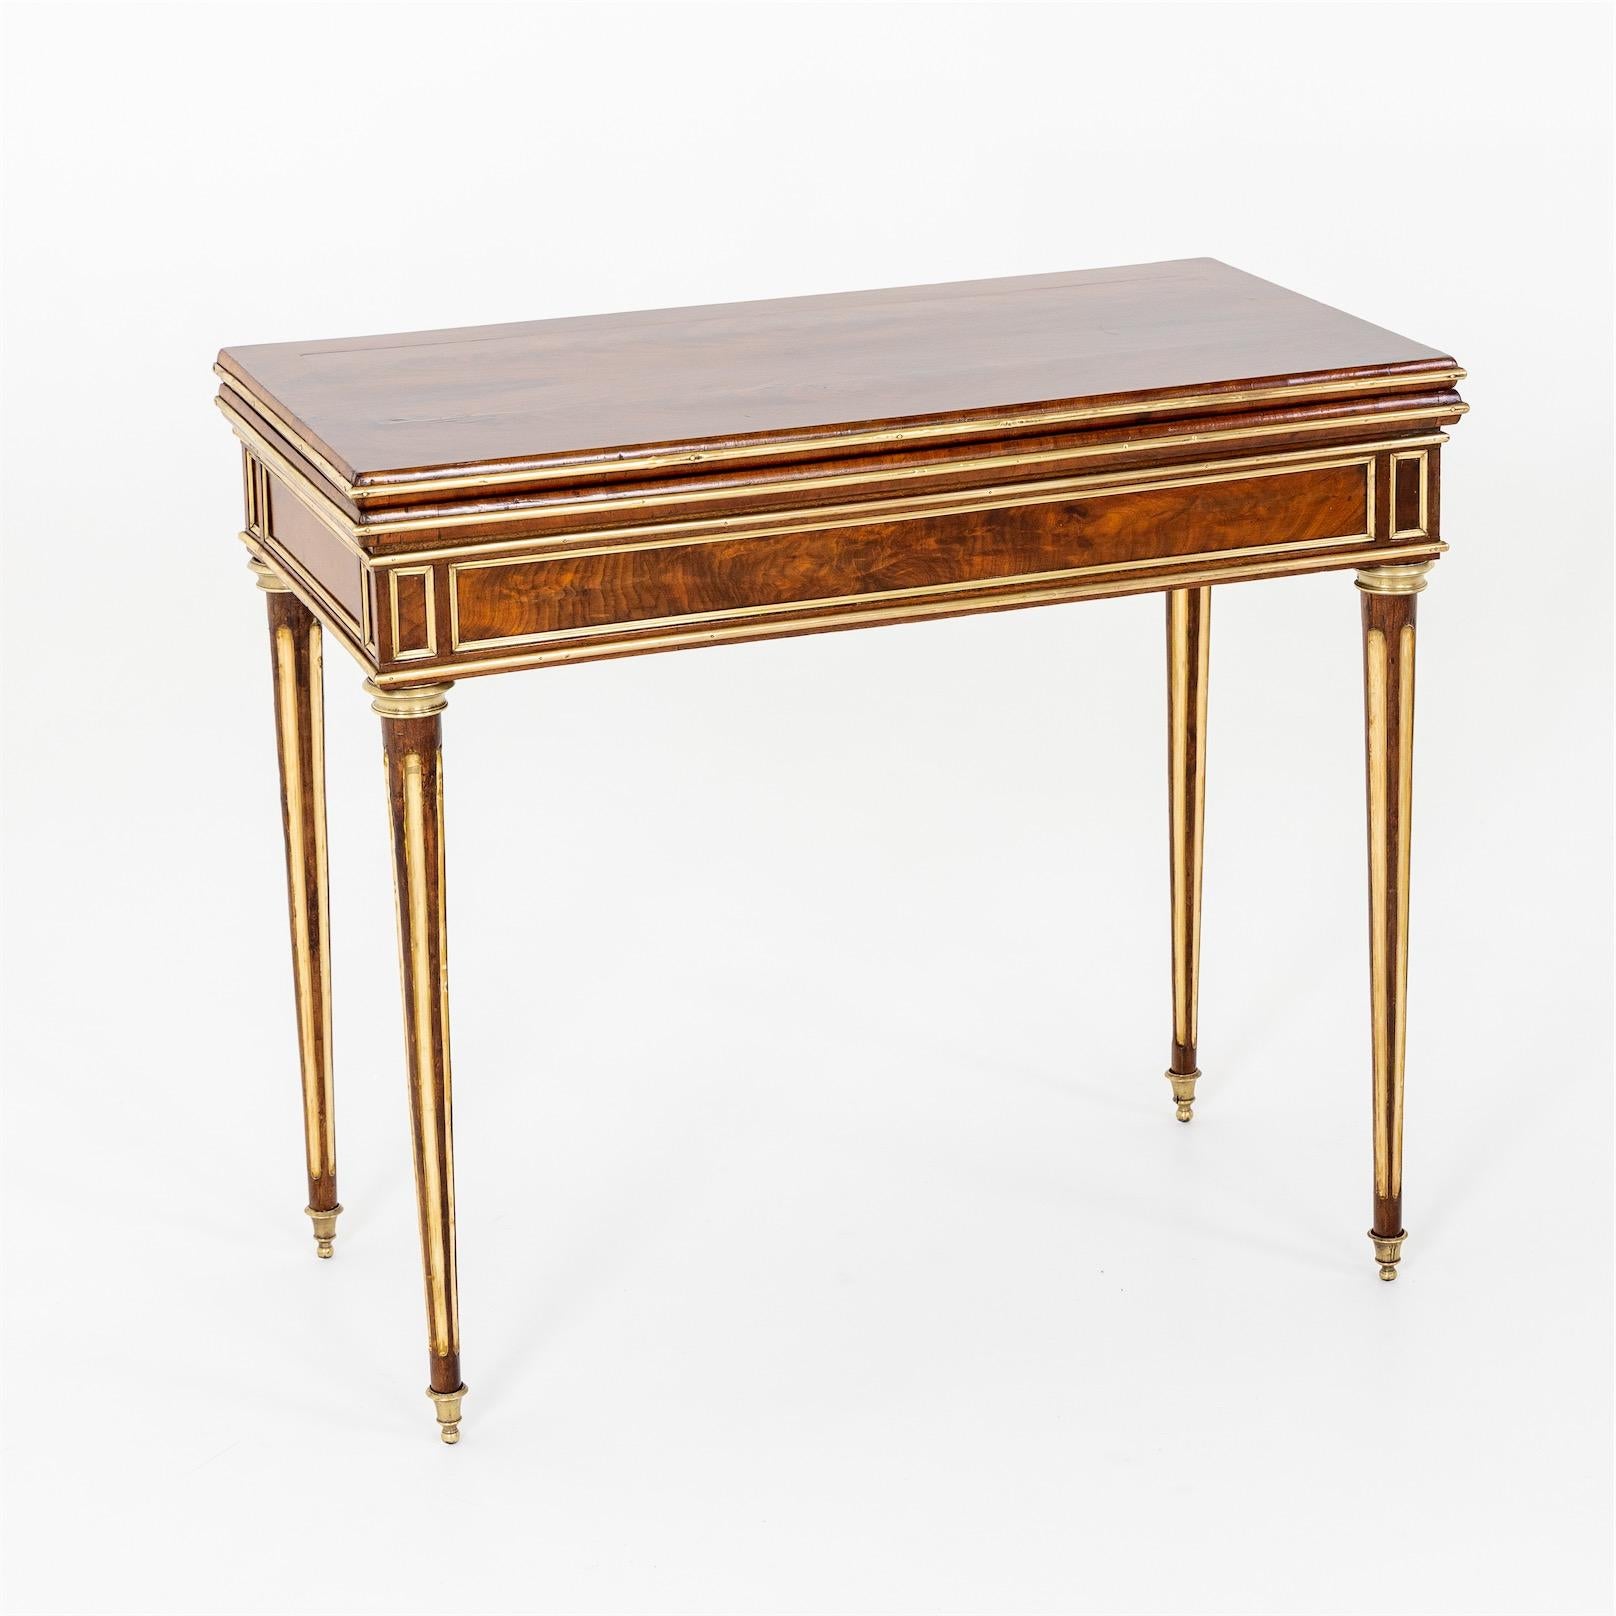 French Game Table, Restauration Period, circa 1835